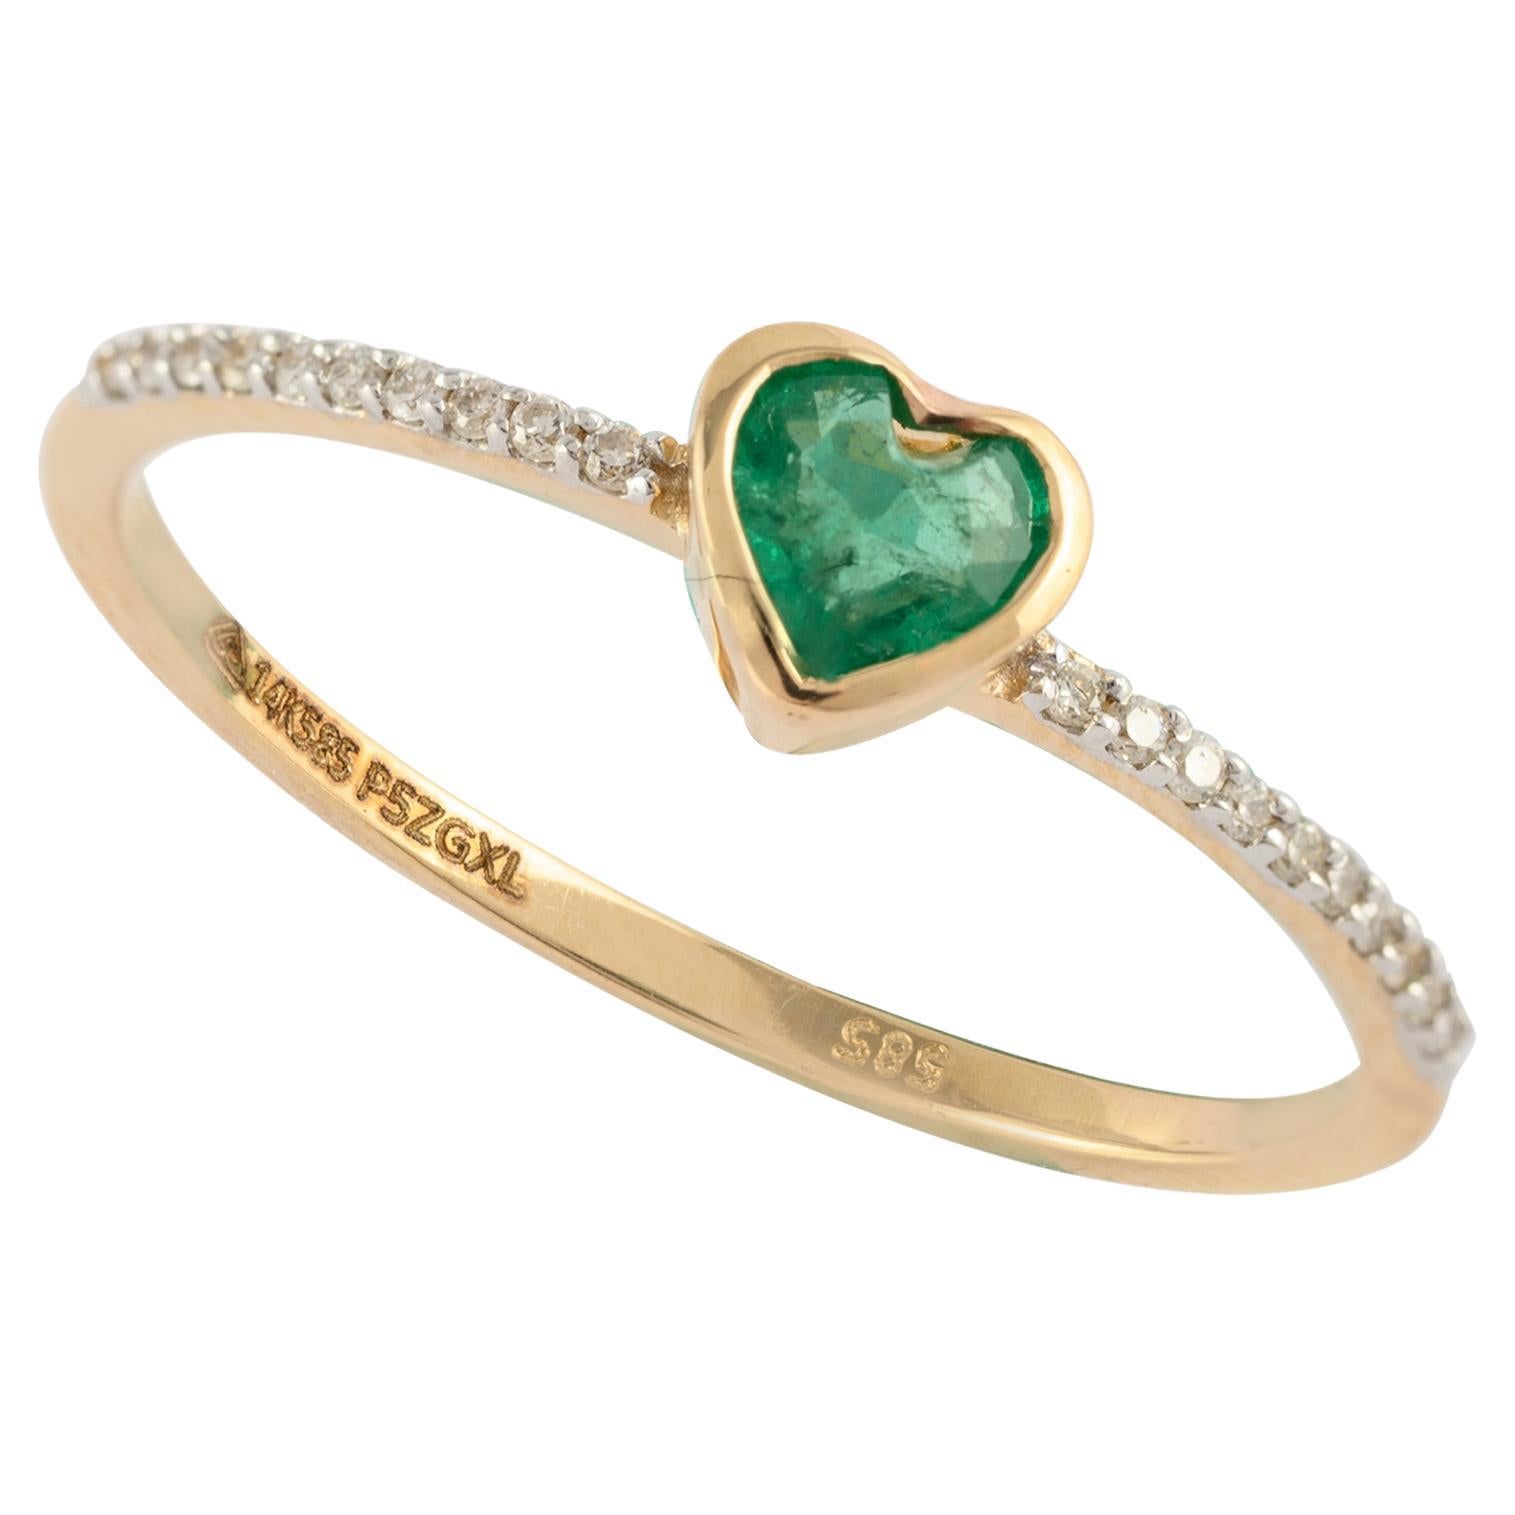 For Sale:  Minimalist Heart Cut Emerald Ring Set in 14k Solid Yellow Gold with Diamonds